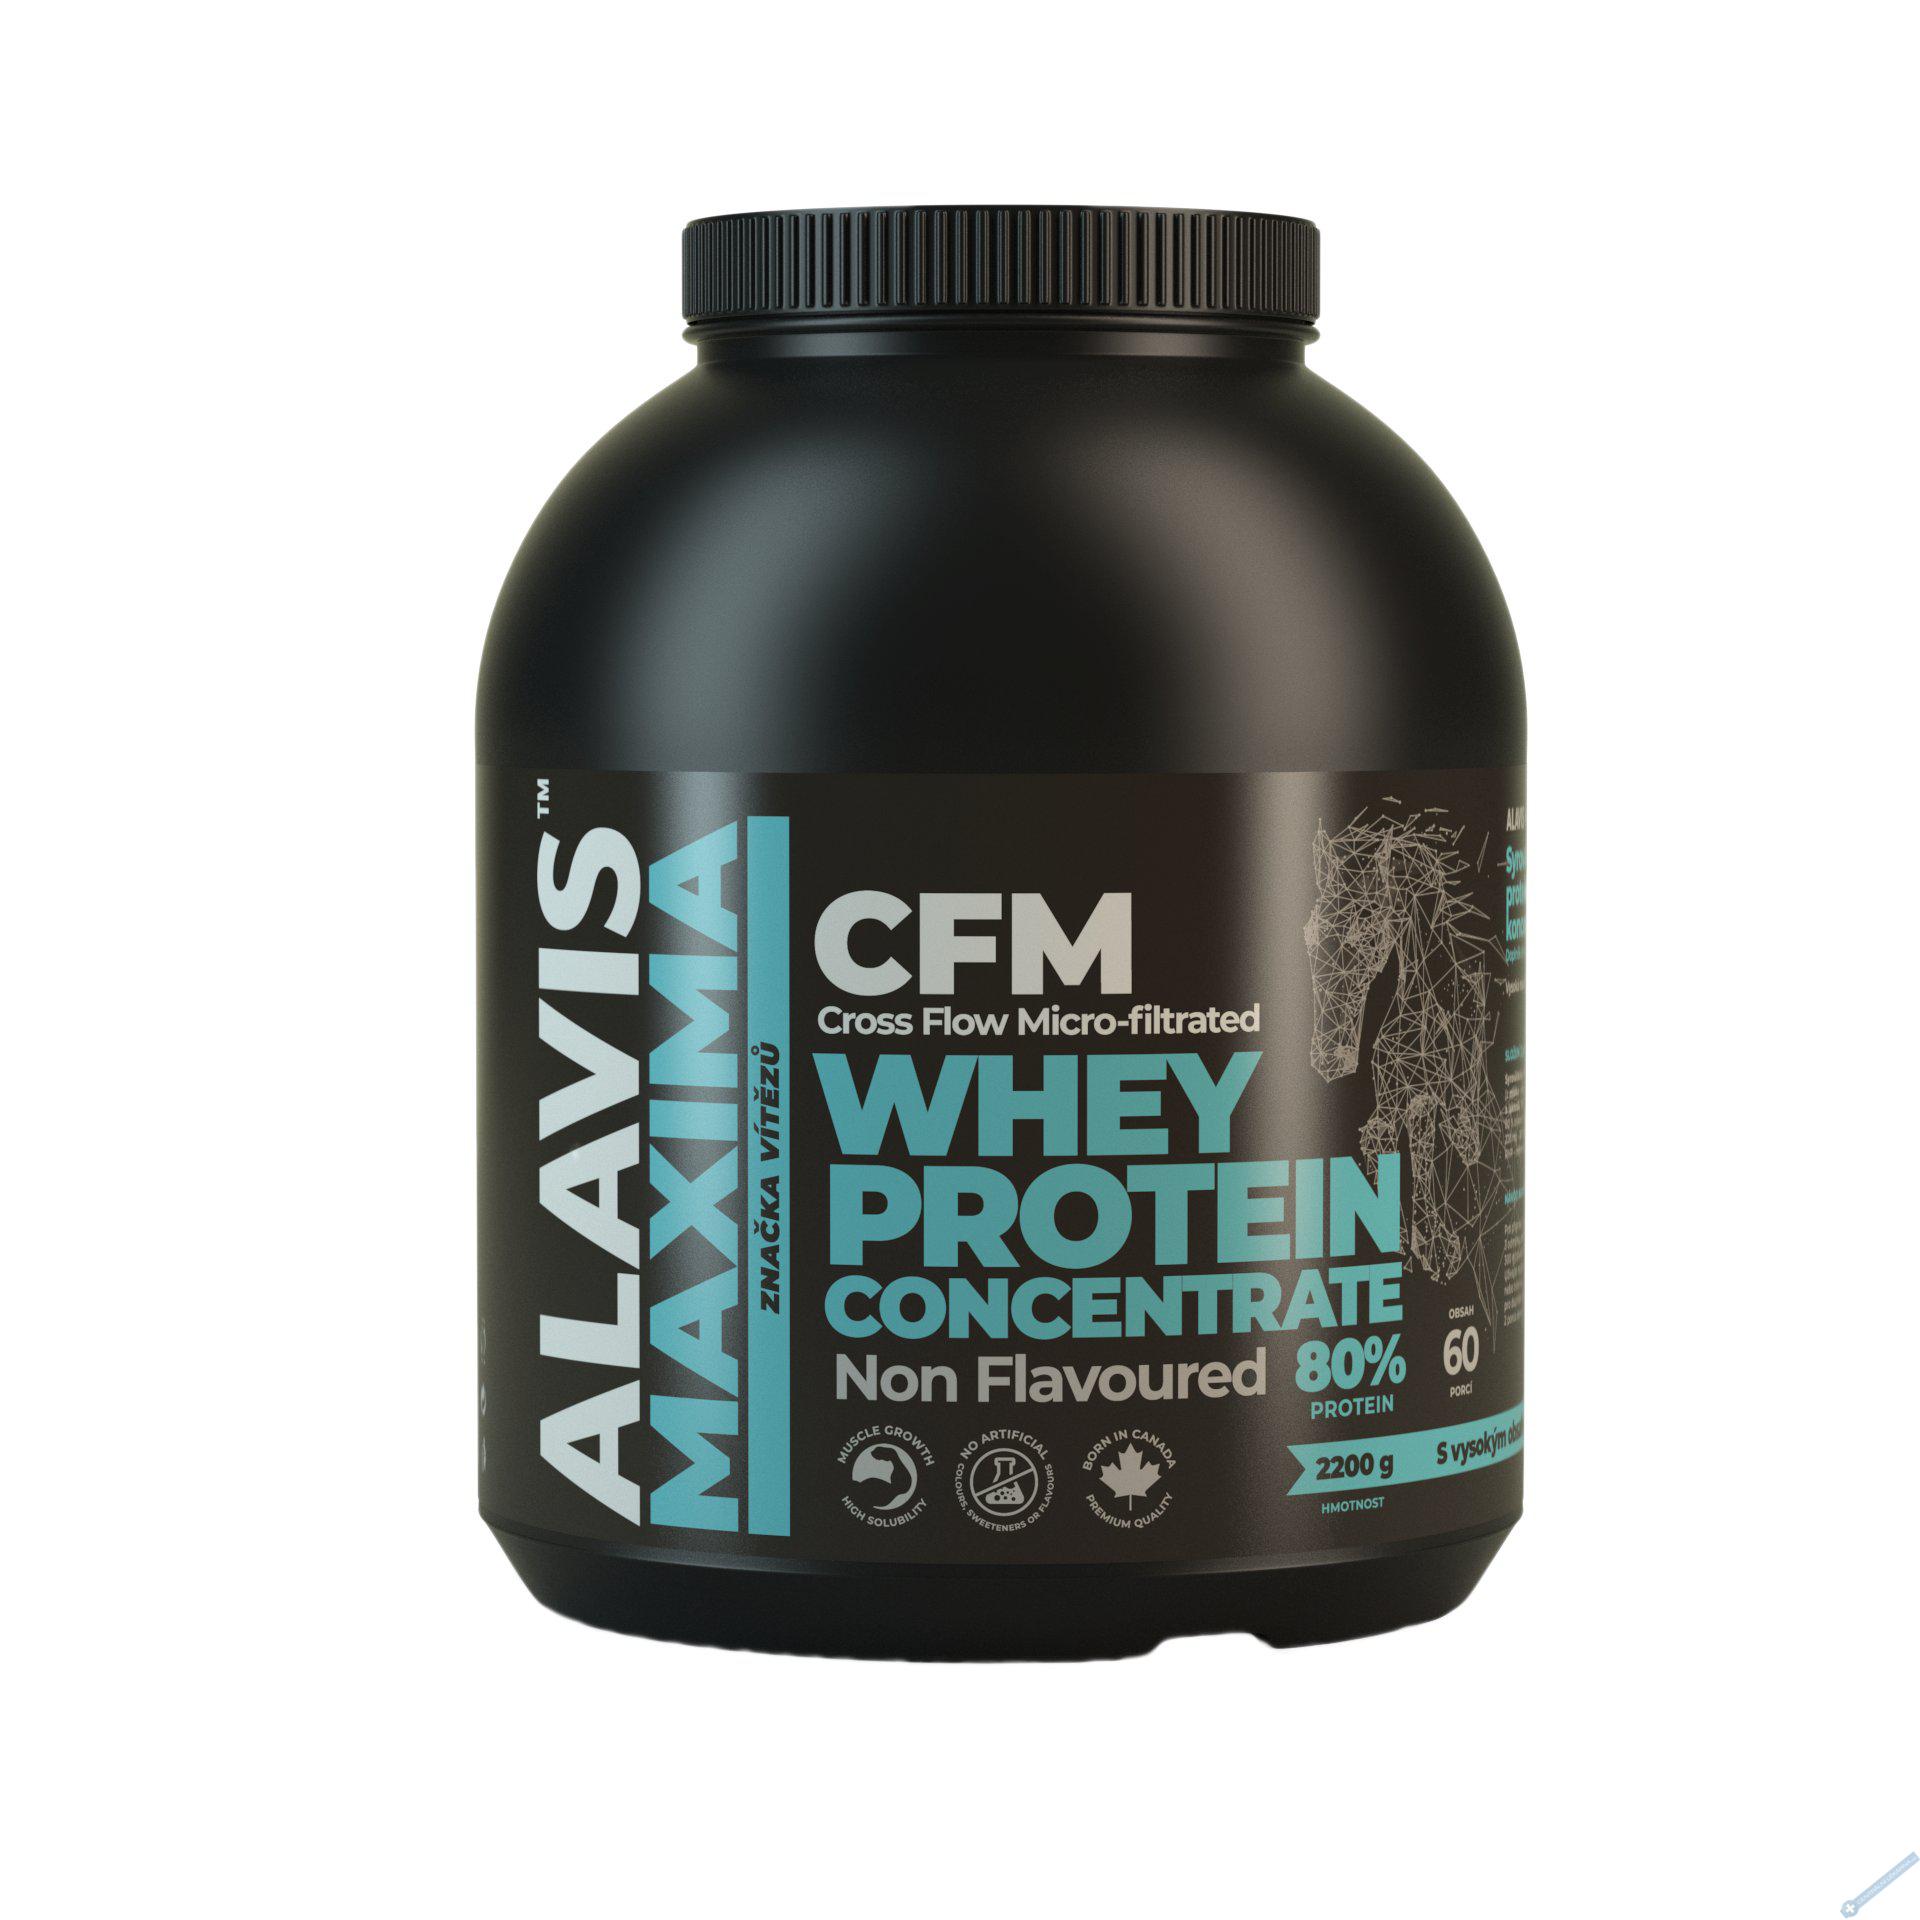 ALAVIS Maxima Whey Protein Concentrate 80% 2200g